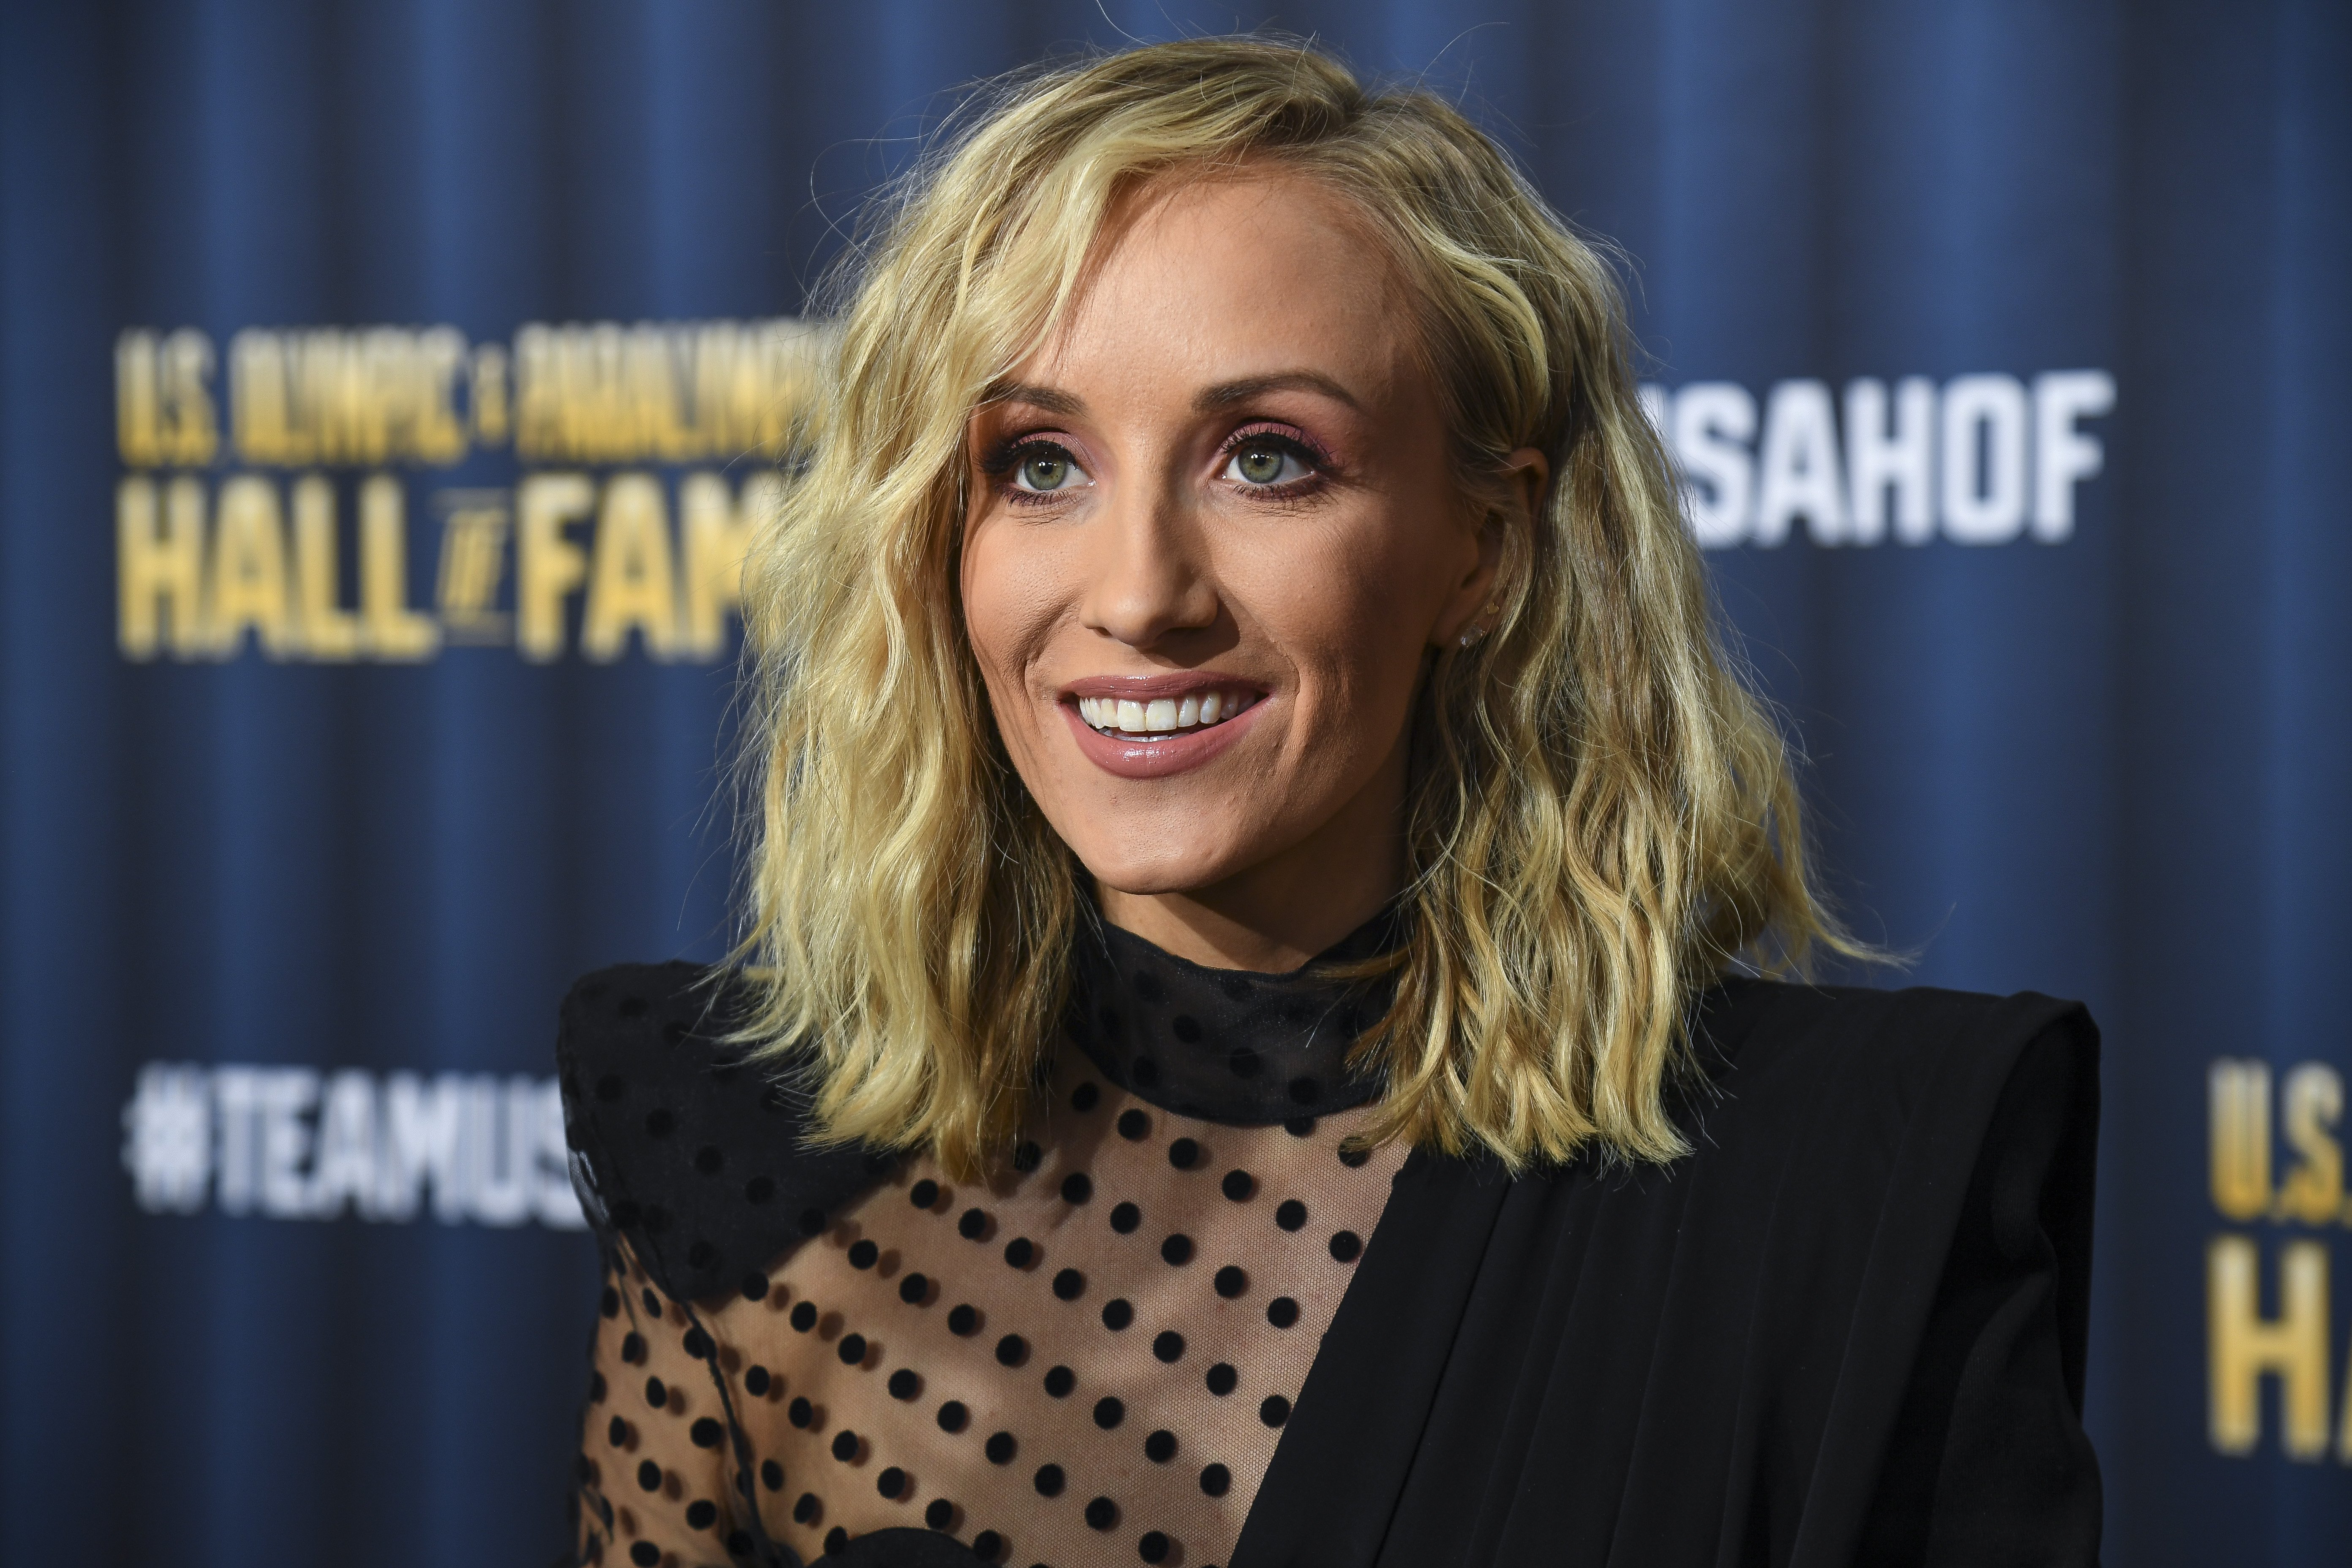 Nastia Liukin pictured at the U.S. Olympic Hall of Fame Class of 2019 Induction Ceremony, Colorado Springs, Colorado. | Photo: Getty Images